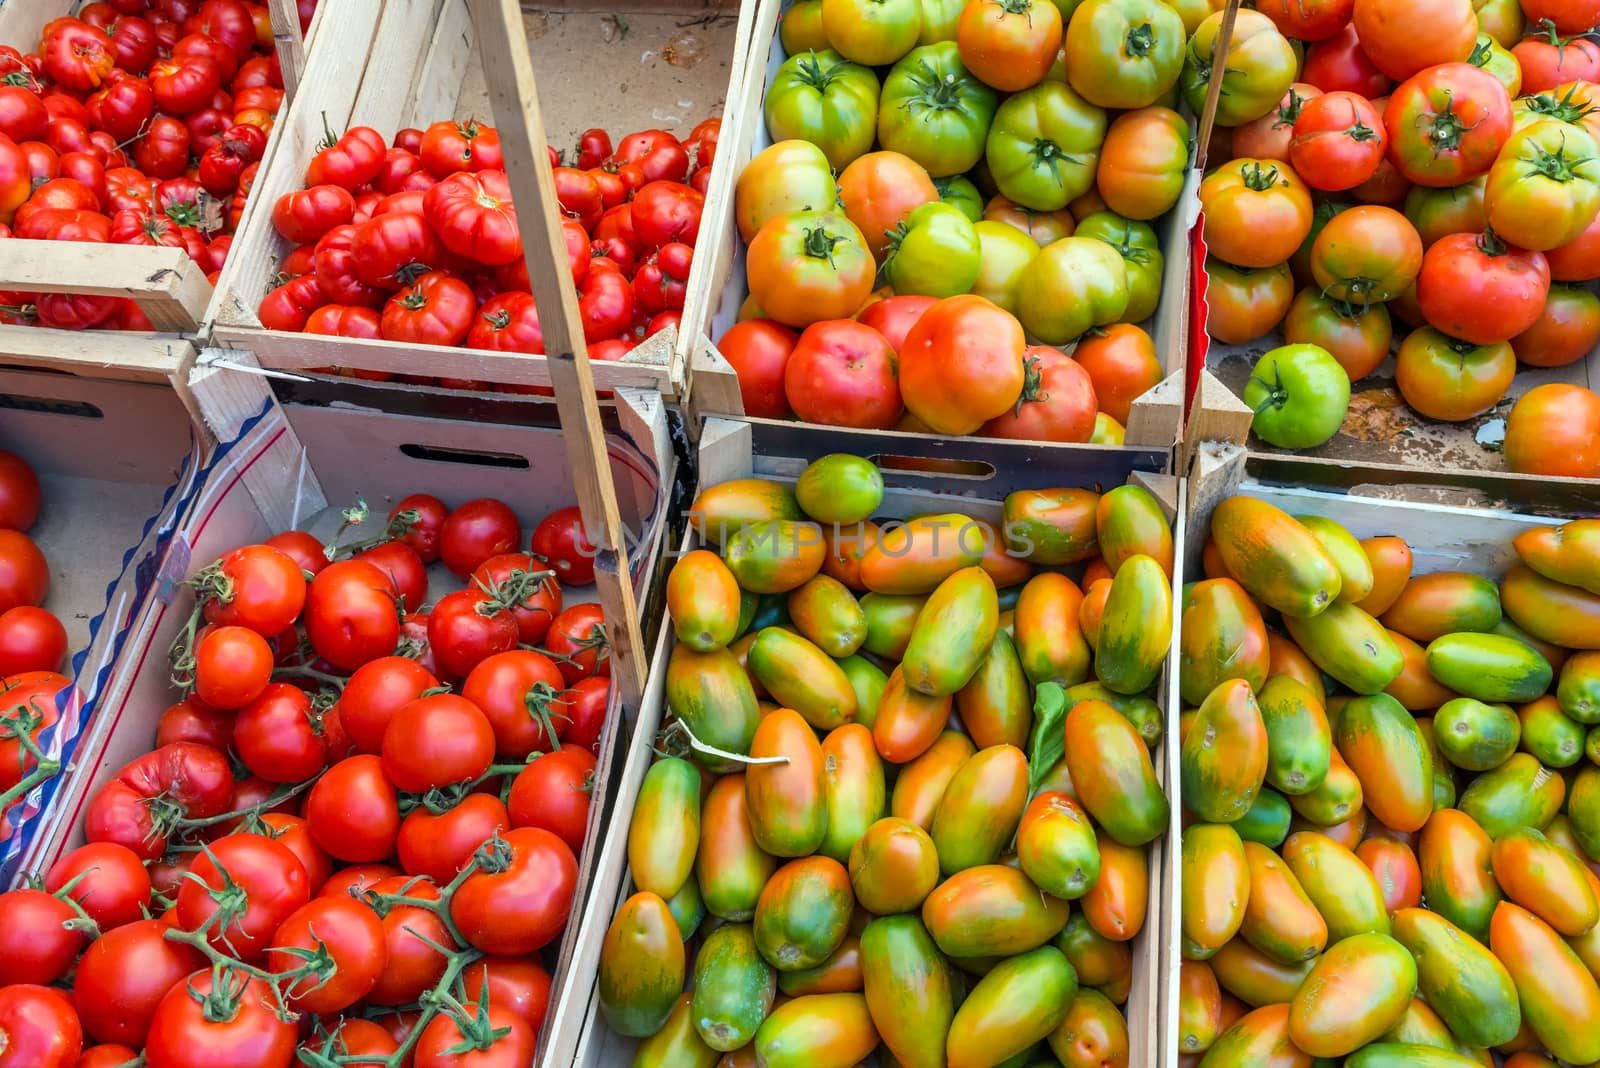 Tomatoes at a market in Palermo by elxeneize